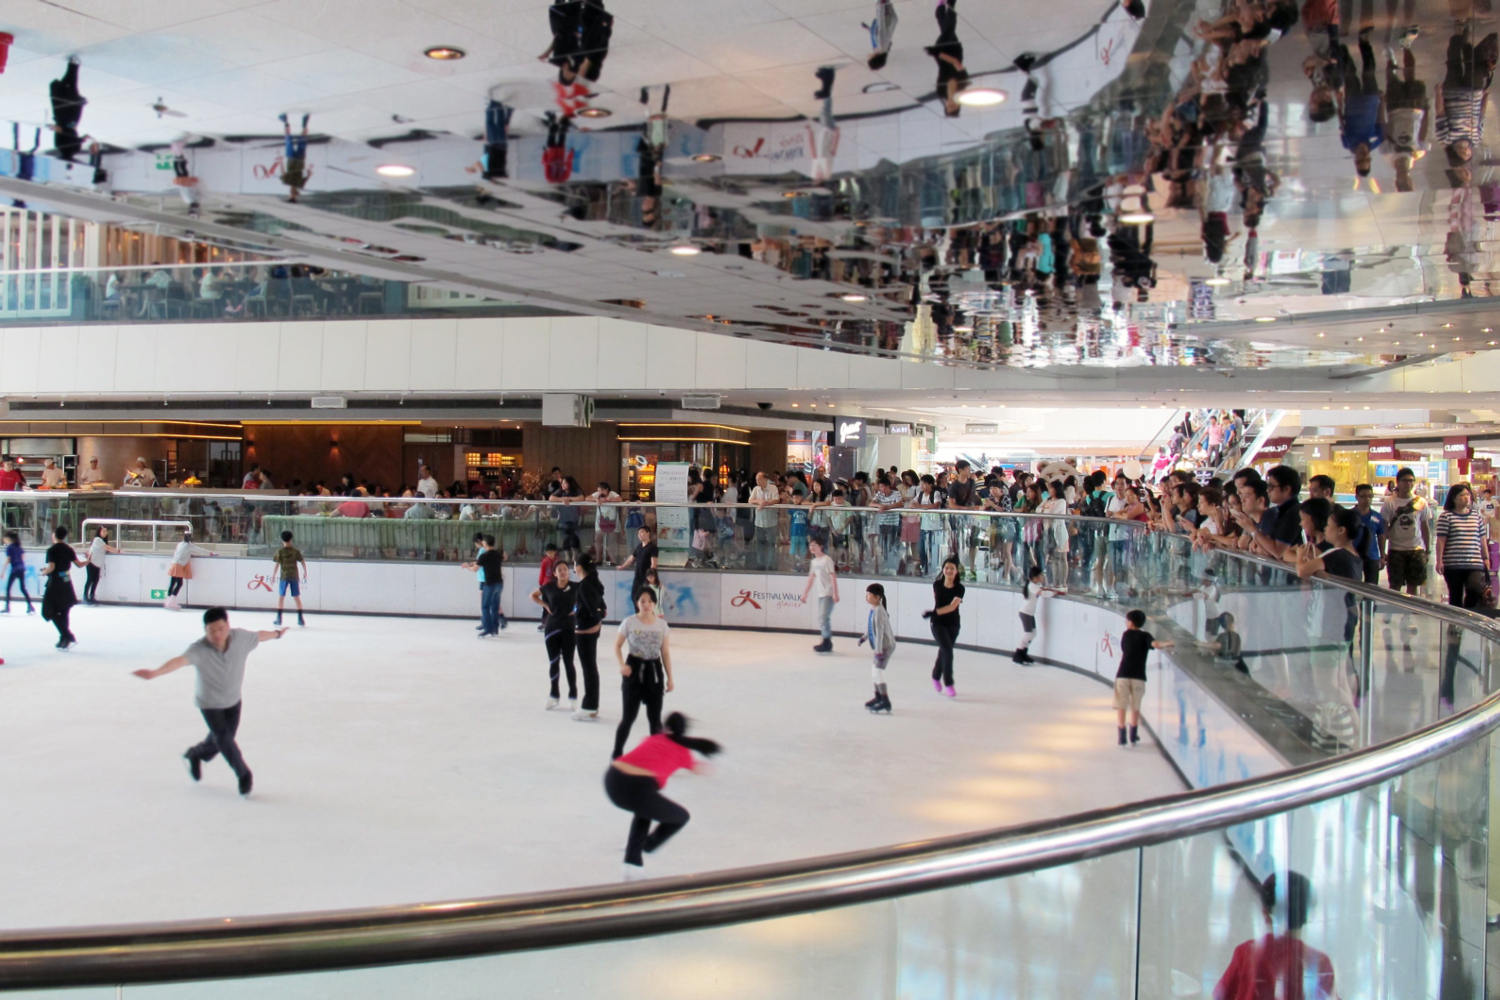 Skating under mirrors at Glacier, Festival Walk. Image by Tom Spurling / Lonely Planet